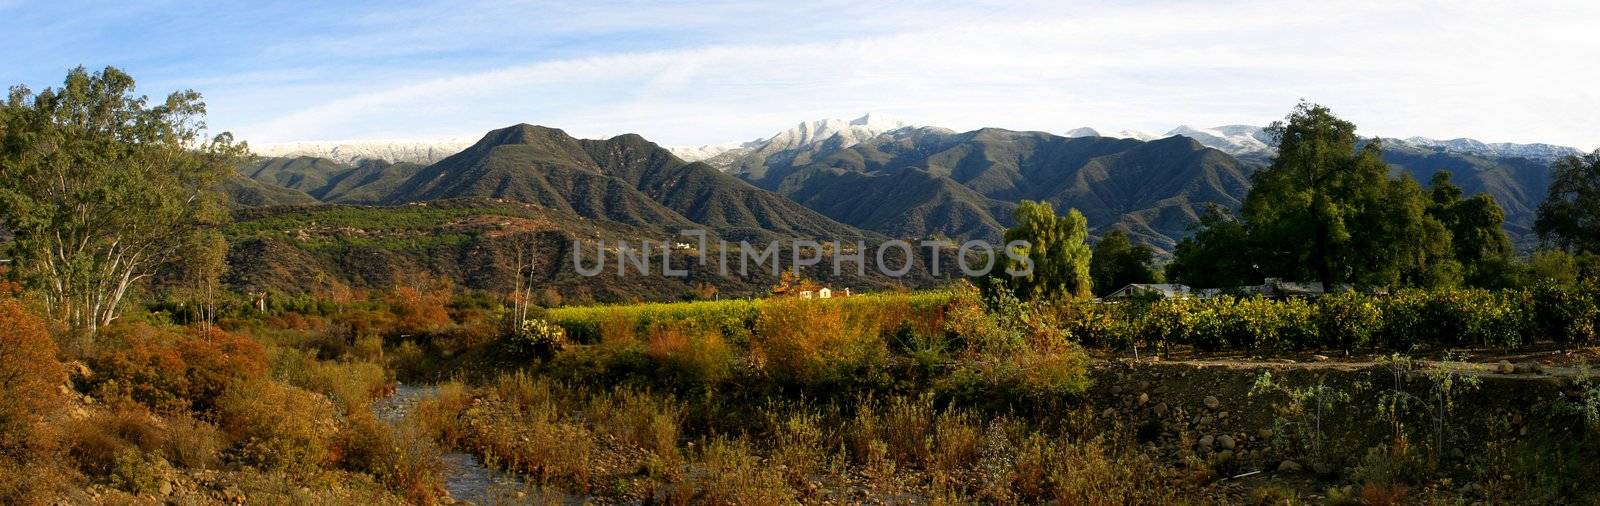 Ojai Valley With Snow (PI) by hlehnerer